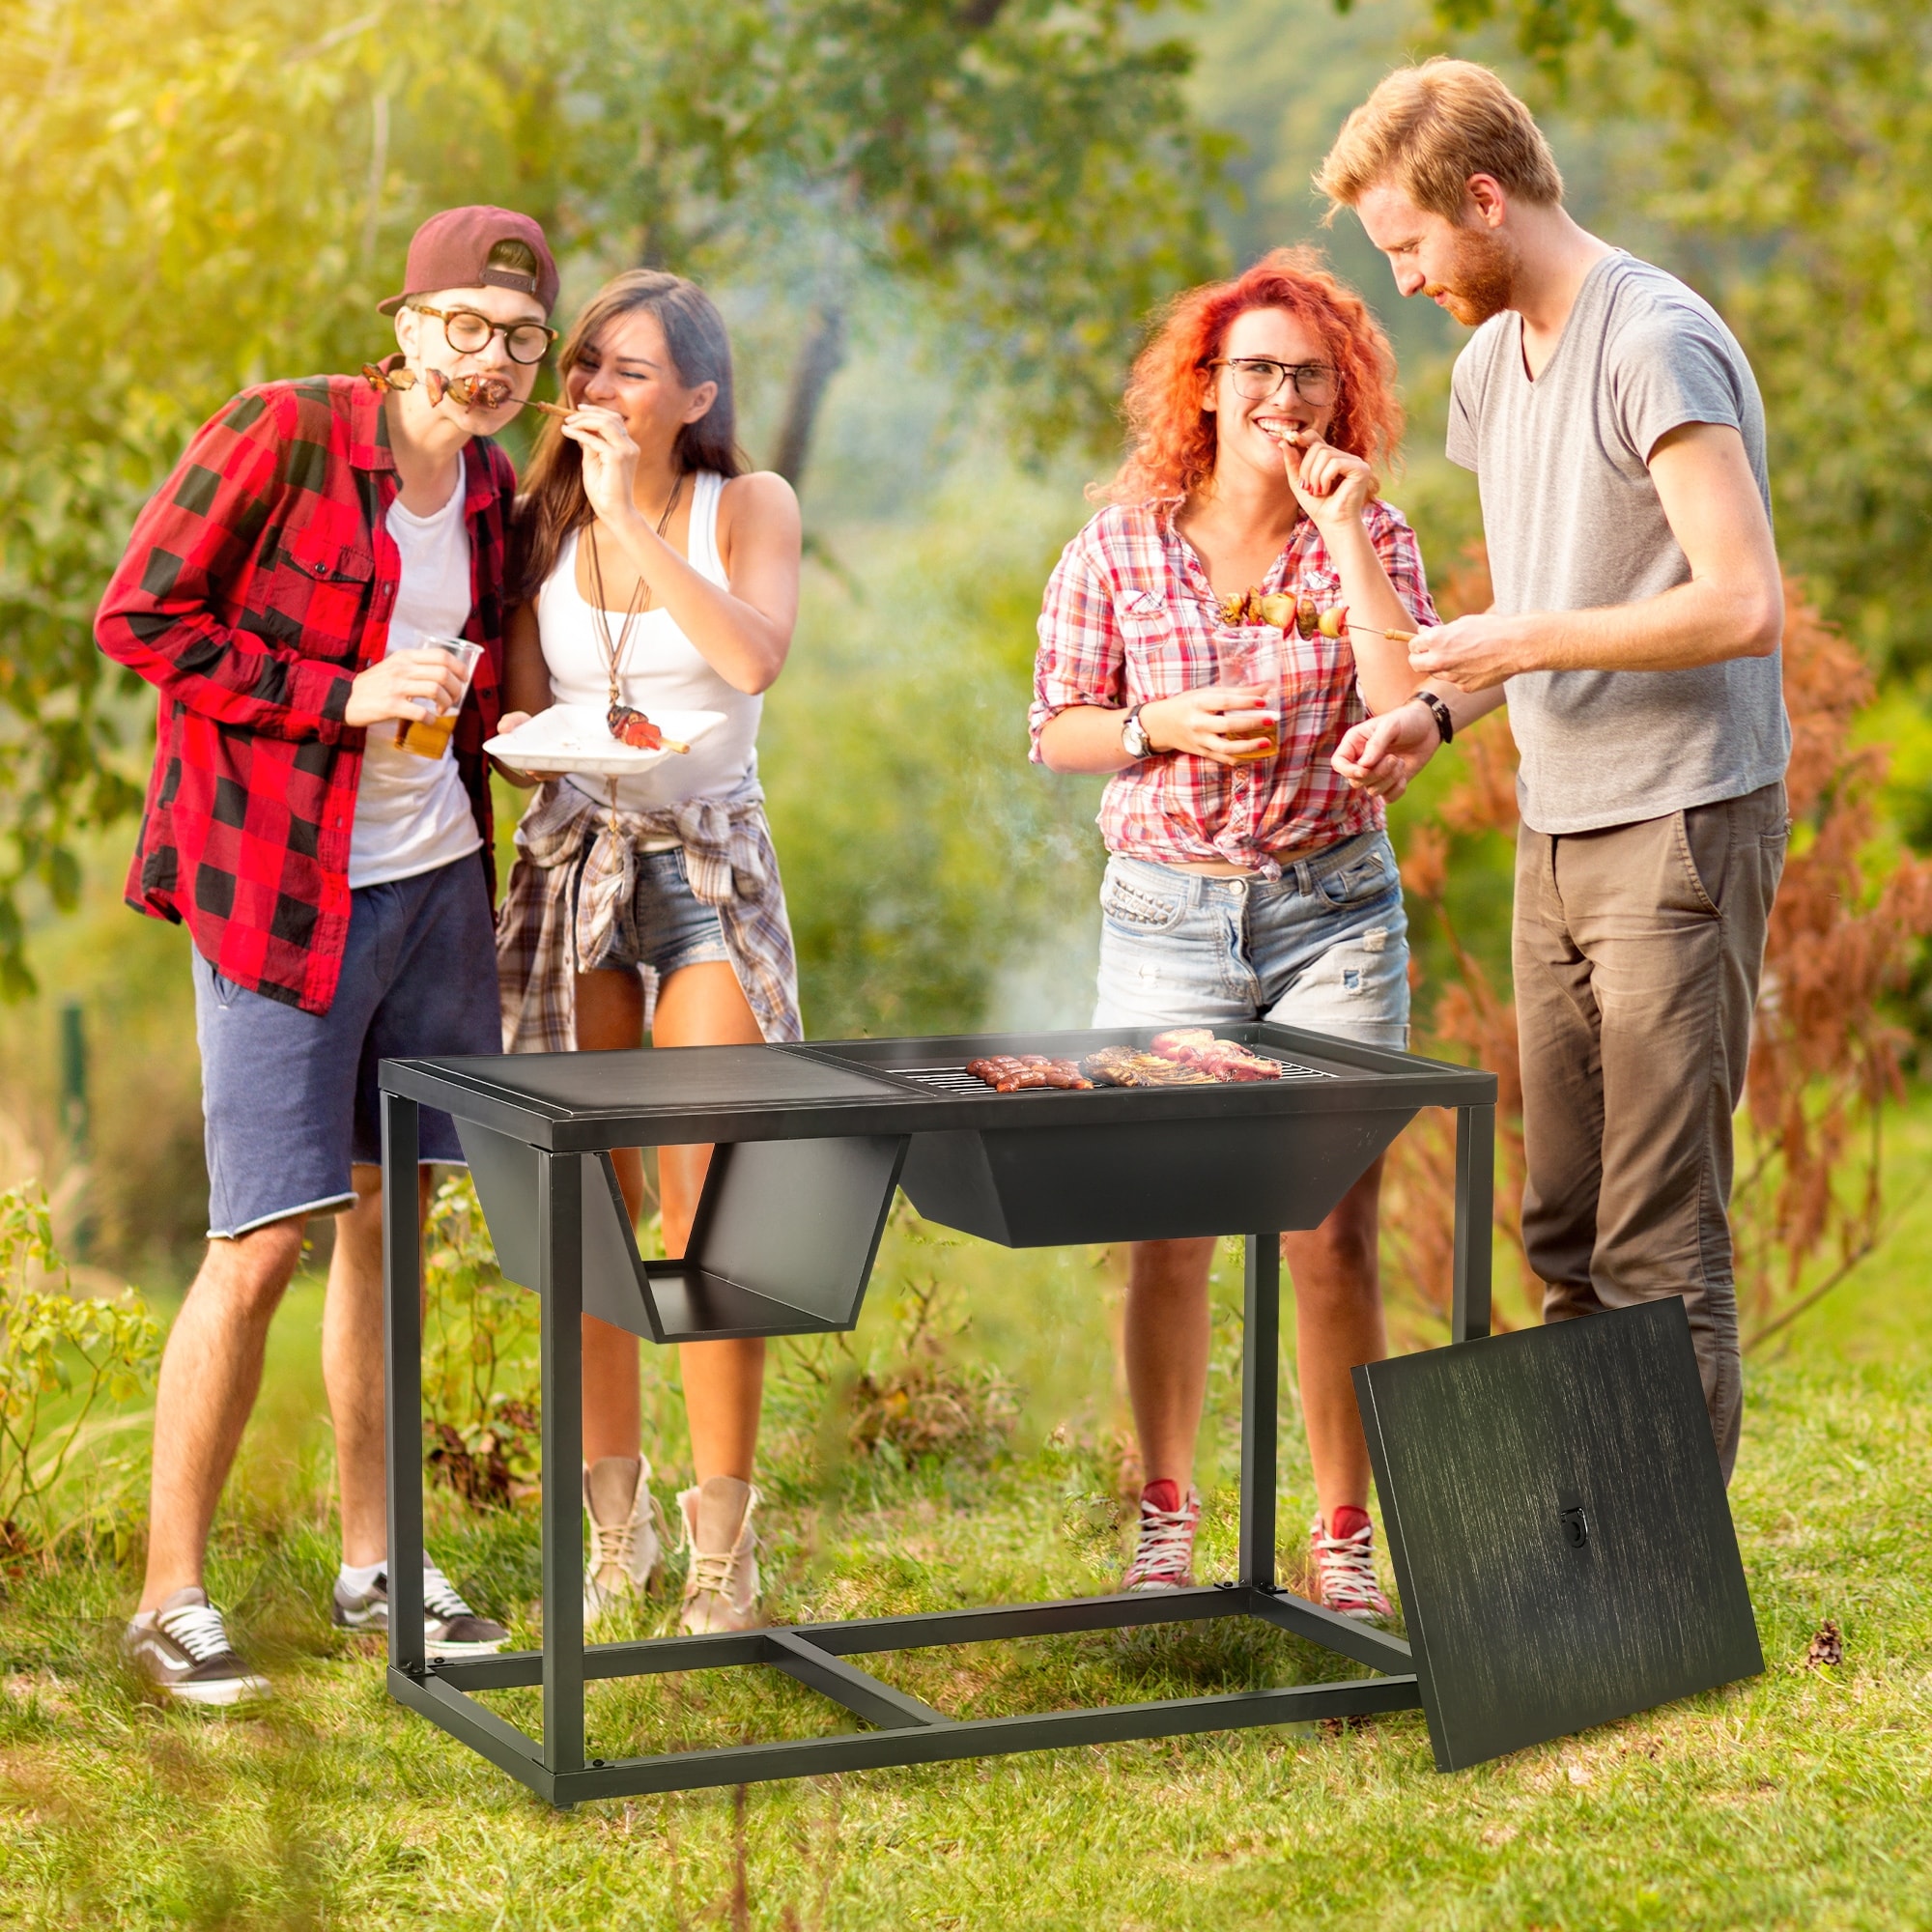 Outsunny 4-in-1 Fire Pit, BBQ Grill, Ice Bucket Cooler, Garden Table, with Cooking Grate, Log Grate and Waterproof Cover